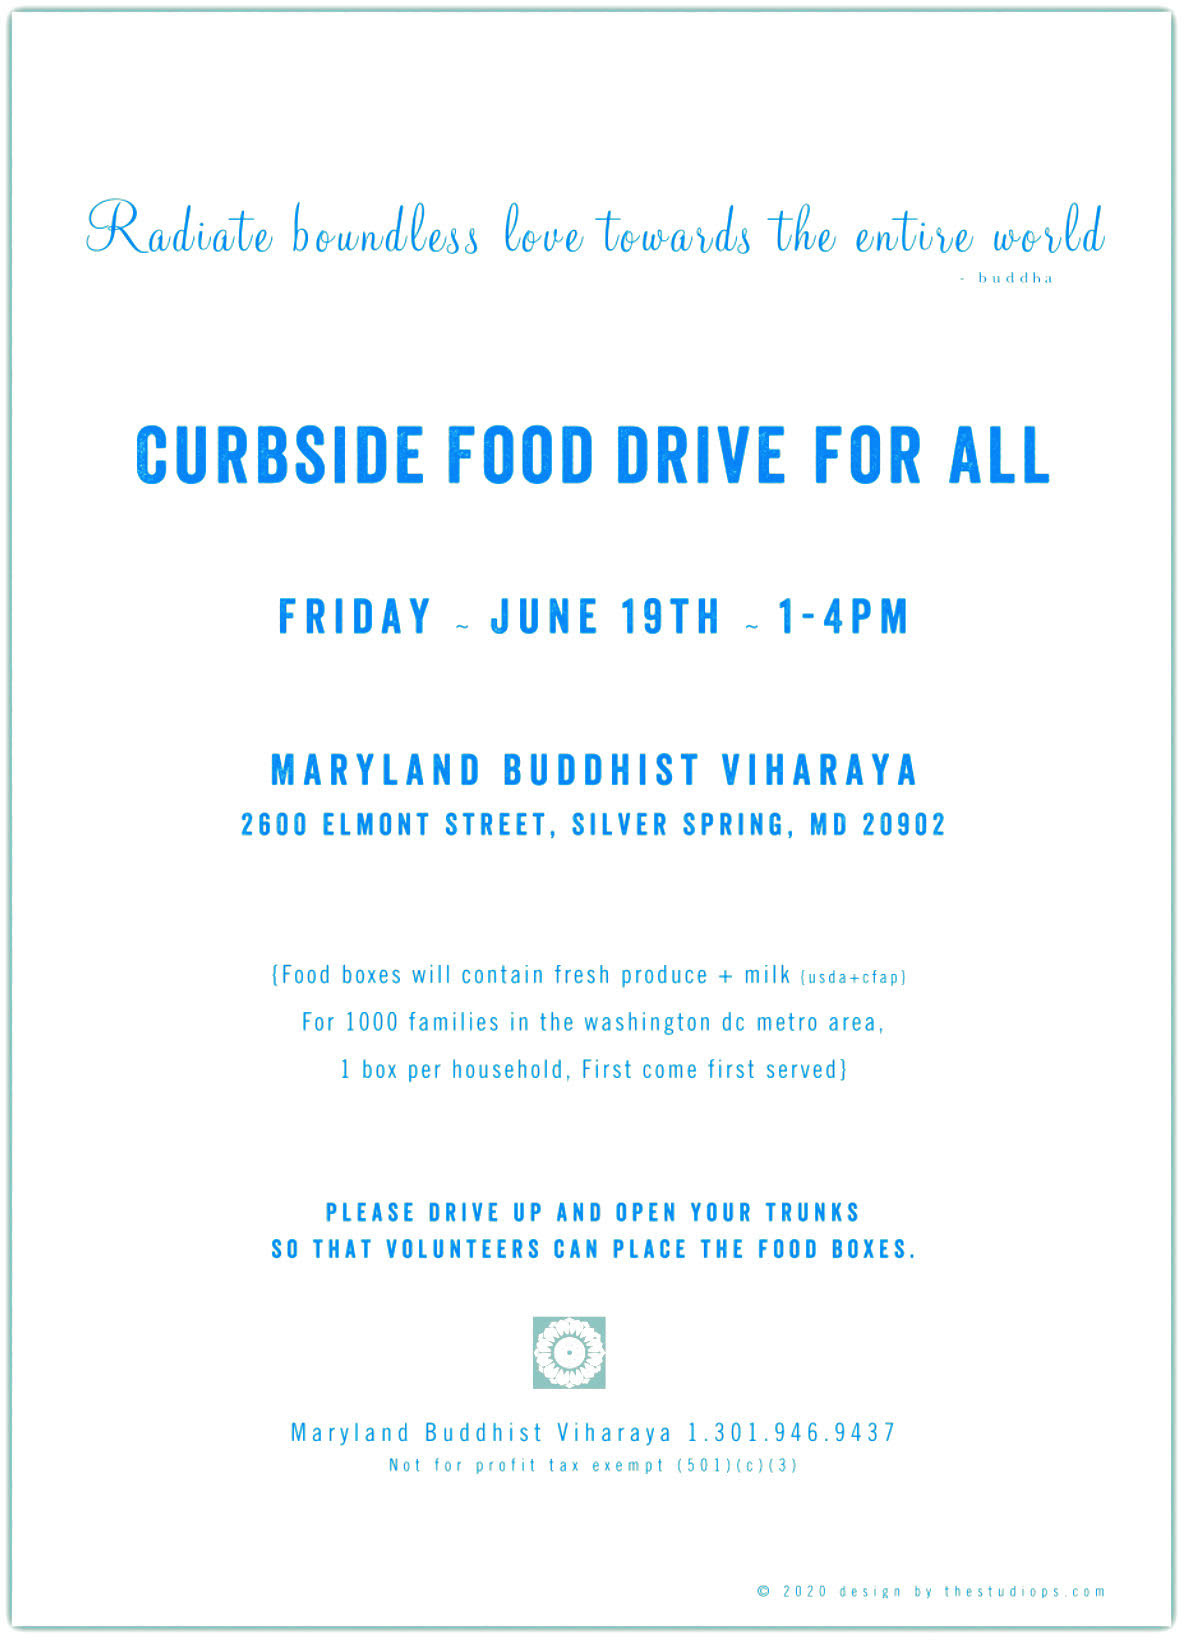 CURBSIDE FOOD DRIVE FOR ALL